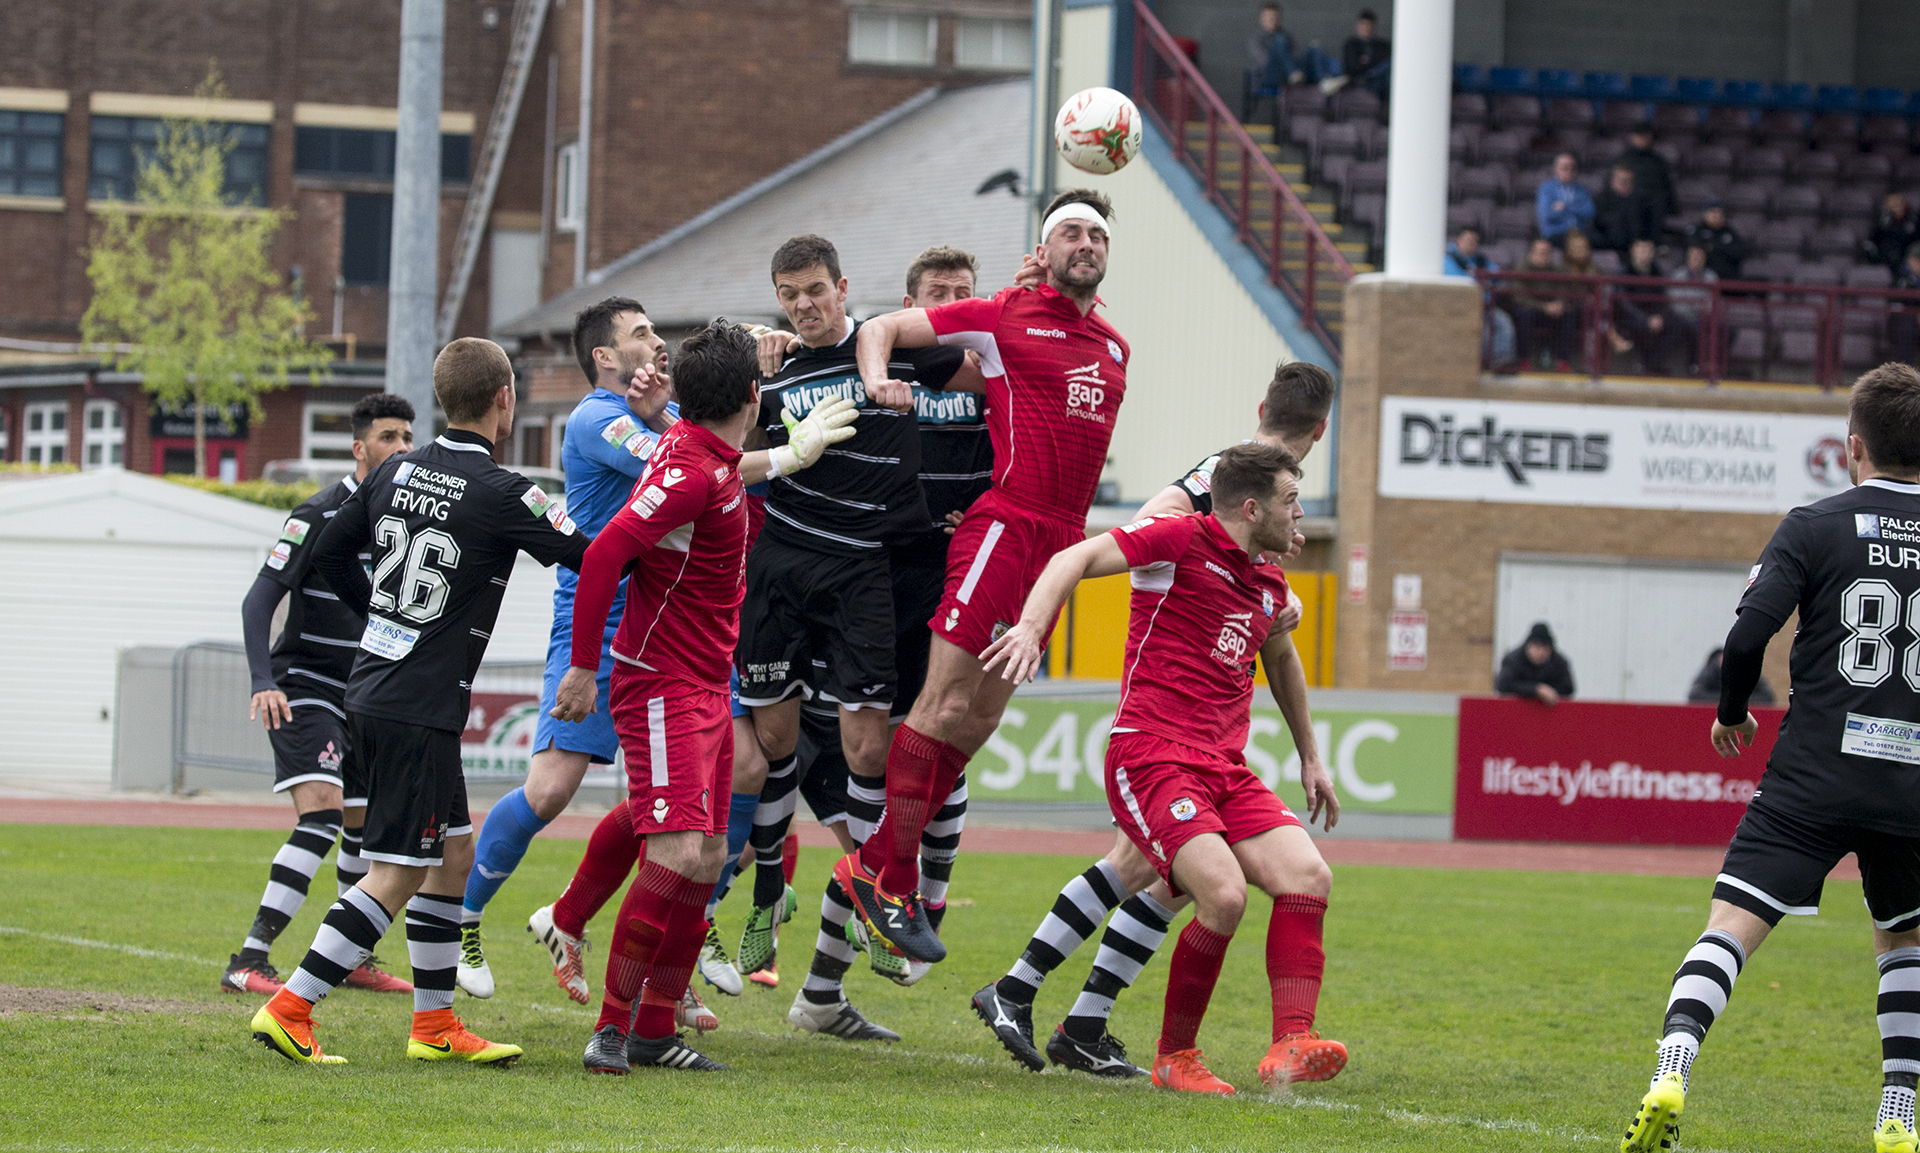 George Horan heads home for The Nomads to give the a one goal lead - © NCM Media